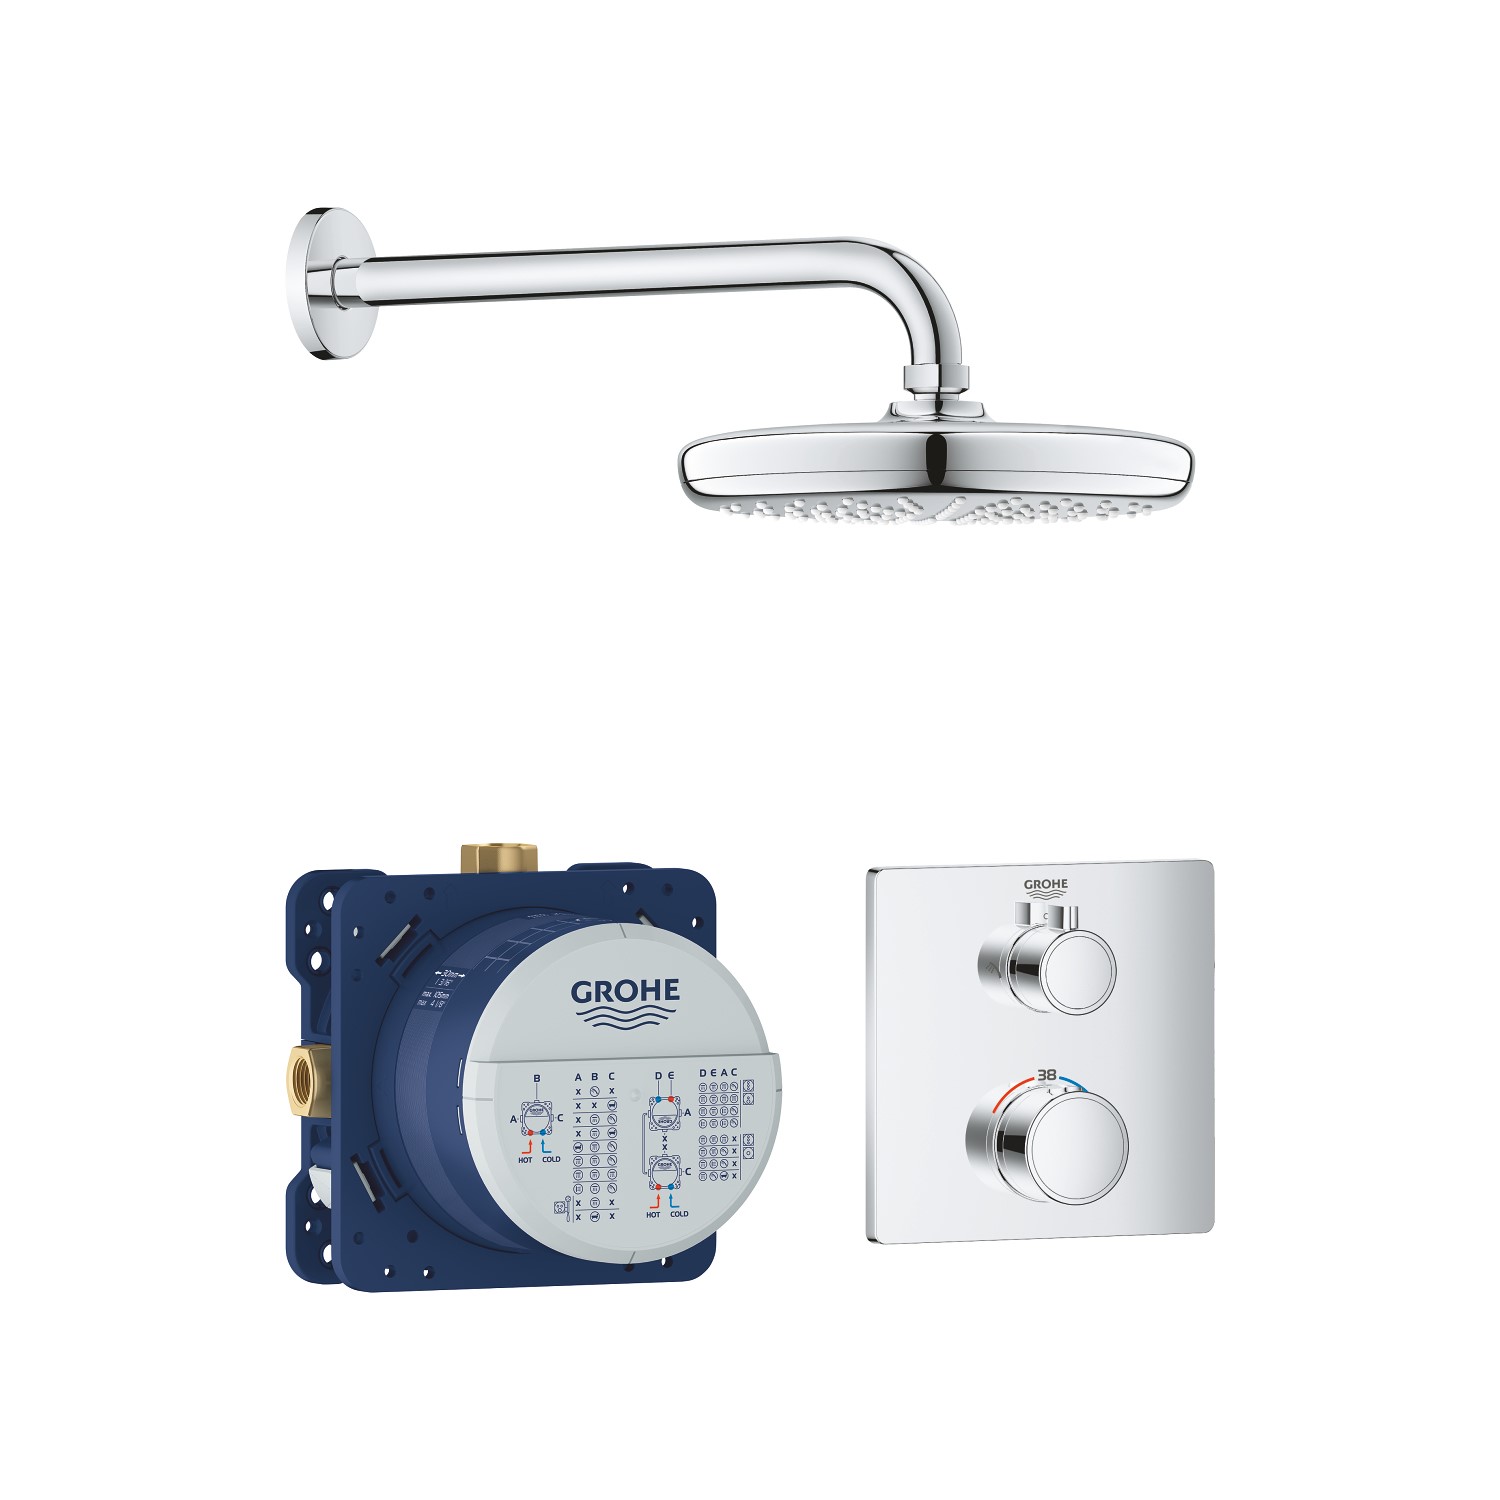 Grohe Tempesta 210 Square Concealed Thermostatic Mixer Shower with Wall Mounted Rainfall Shower Head